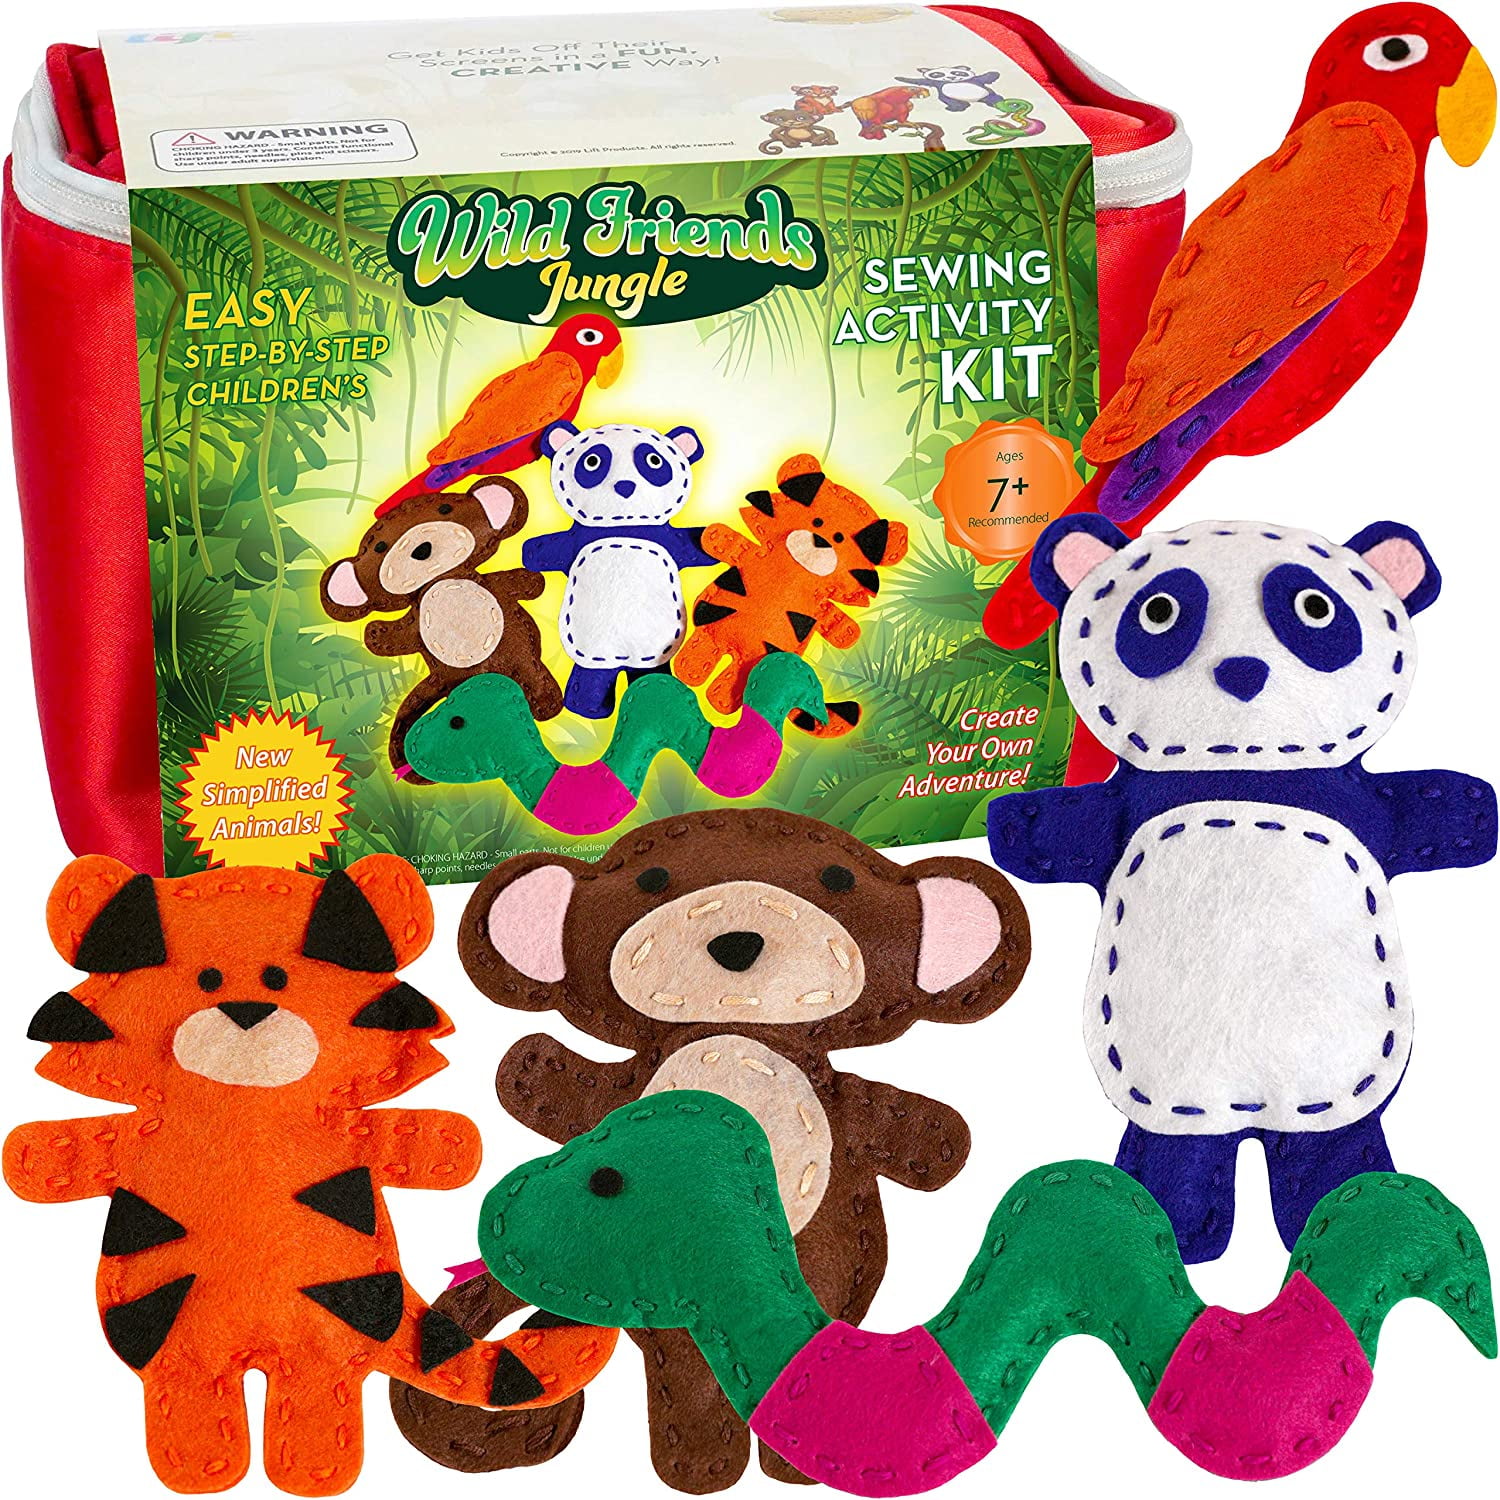 Bryte Jungle Animals Sewing Kit for Kids: A Fun DIY Arts & Crafts  Experience with 5 Pre-Cut Felt Animals, Needles, Thread, Instructions &  More - For Kids Age 7+ - Great Gift